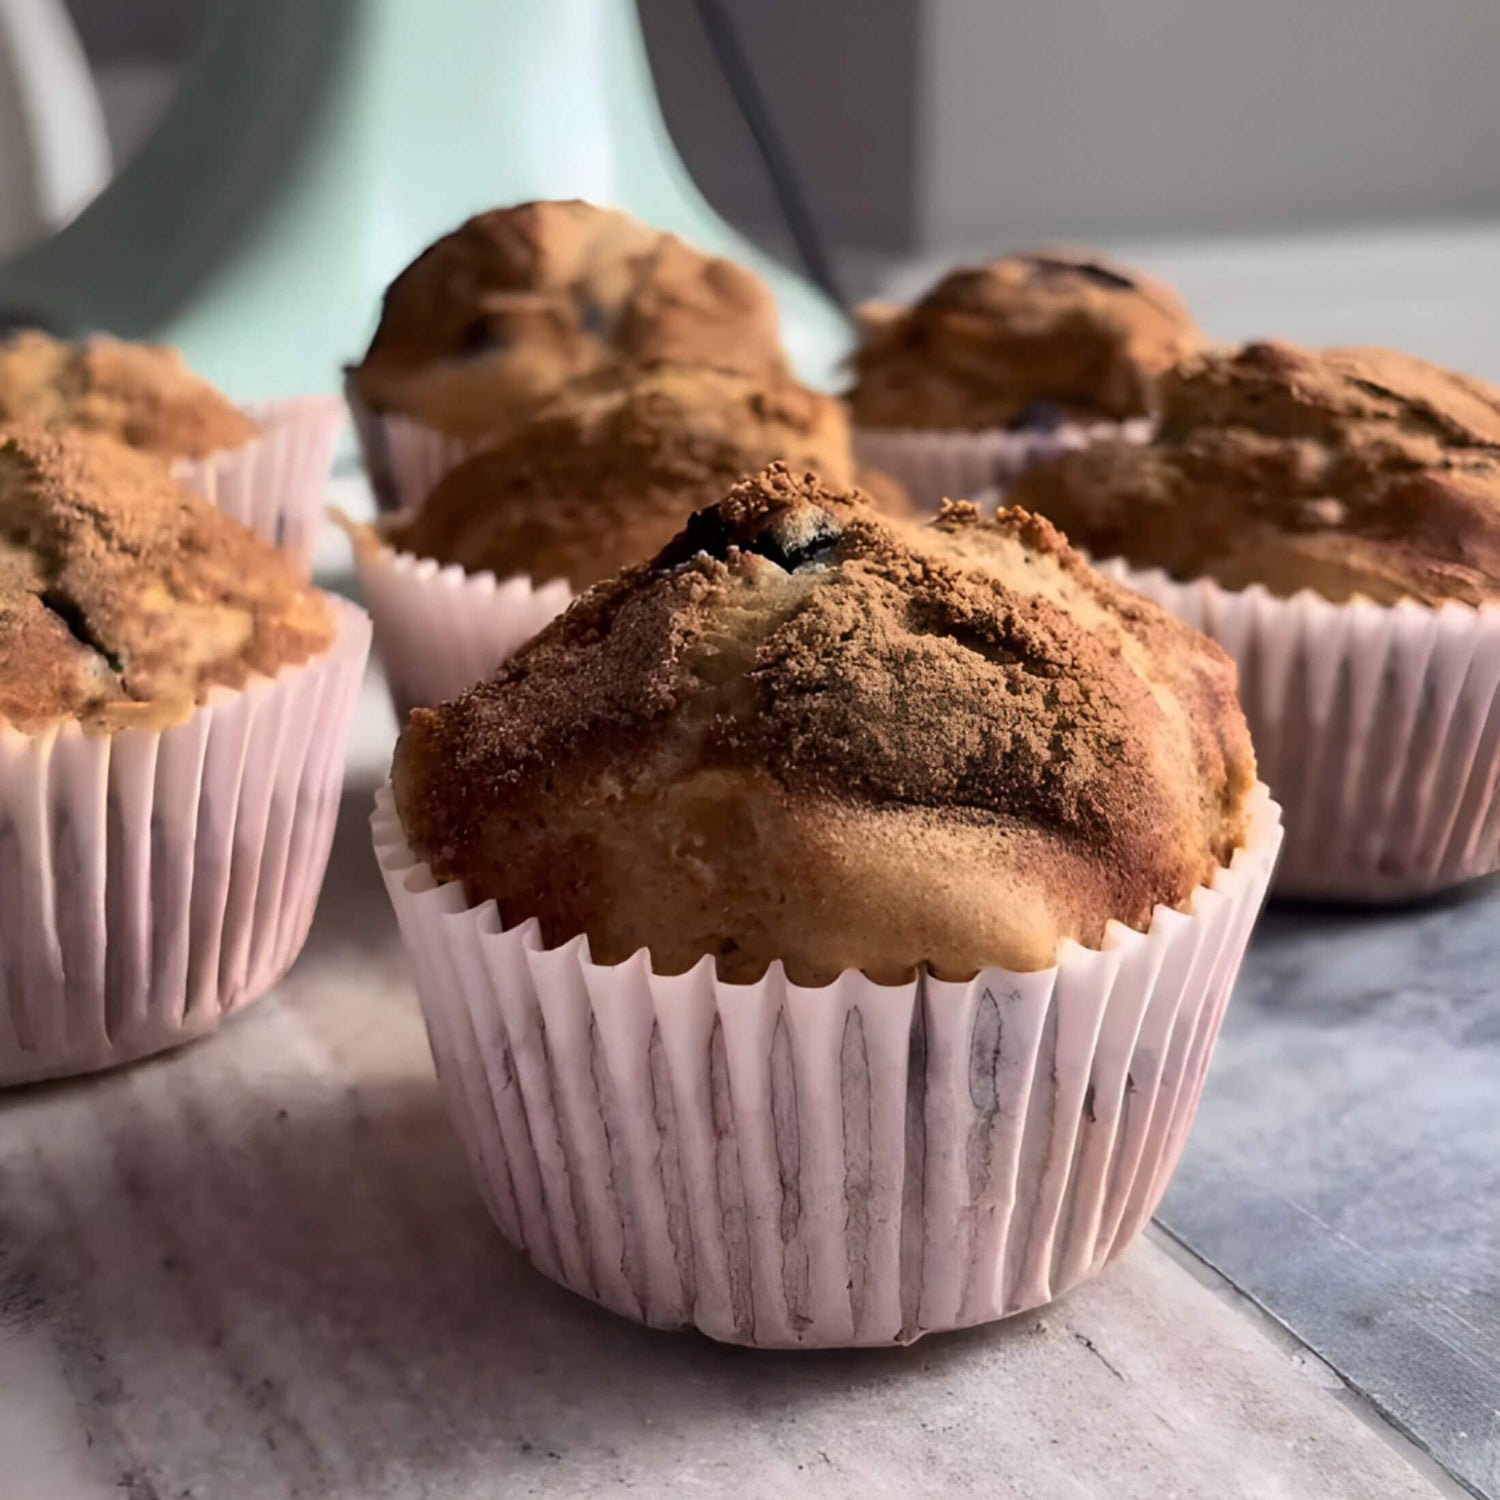 Blueberry Muffins topped with FreshJax Maple Cinnamon Topping